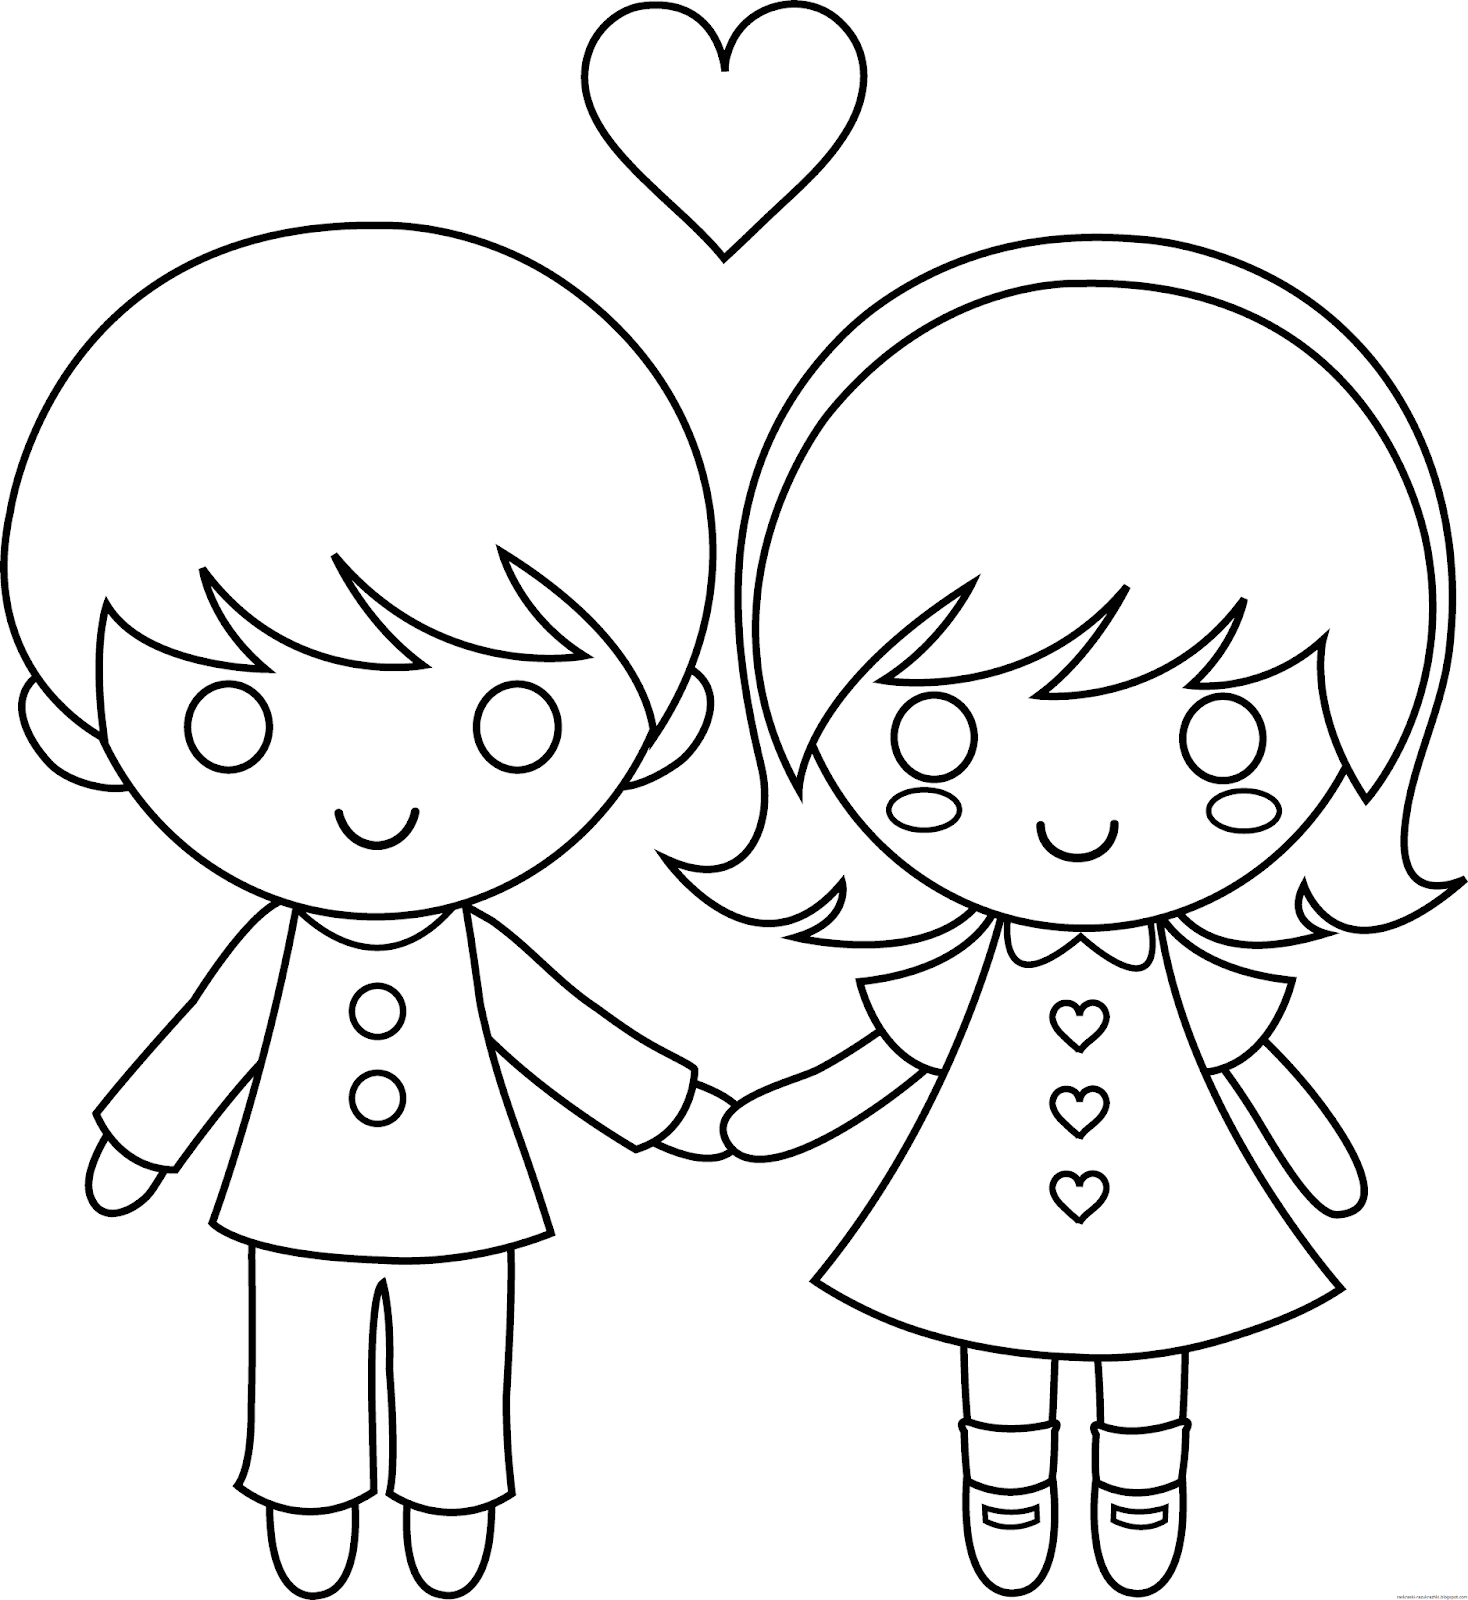 Boy and girl for kids #7